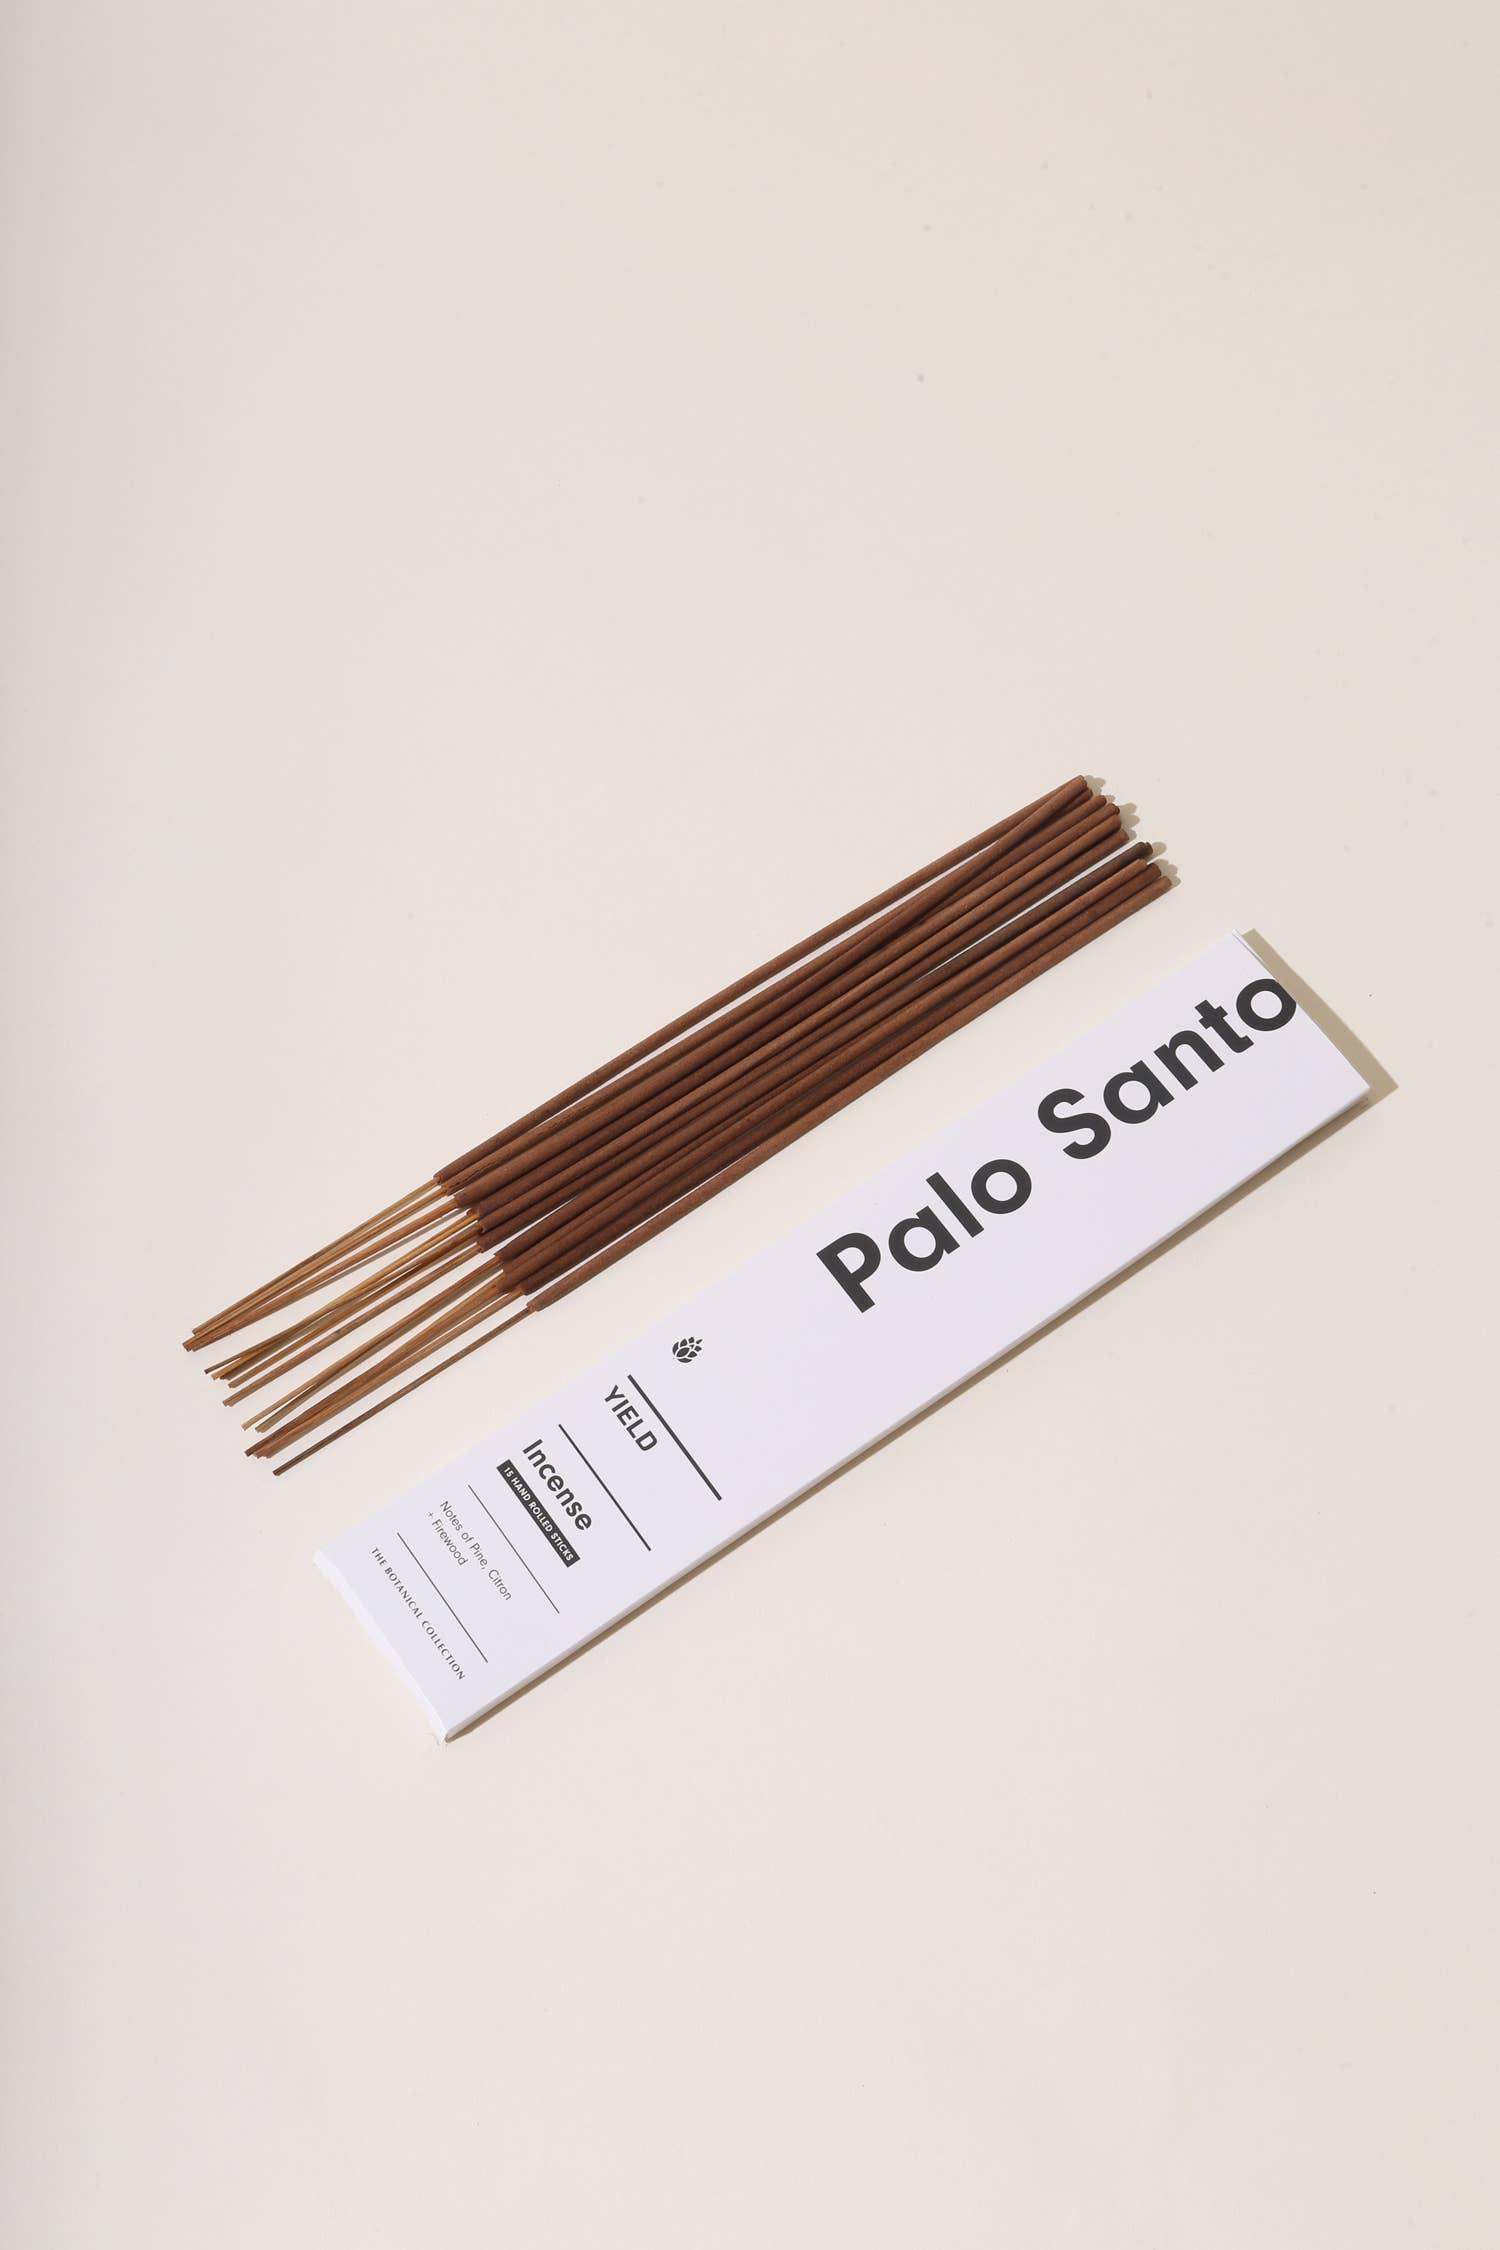 Palo Santo Incense by Yield - Haven